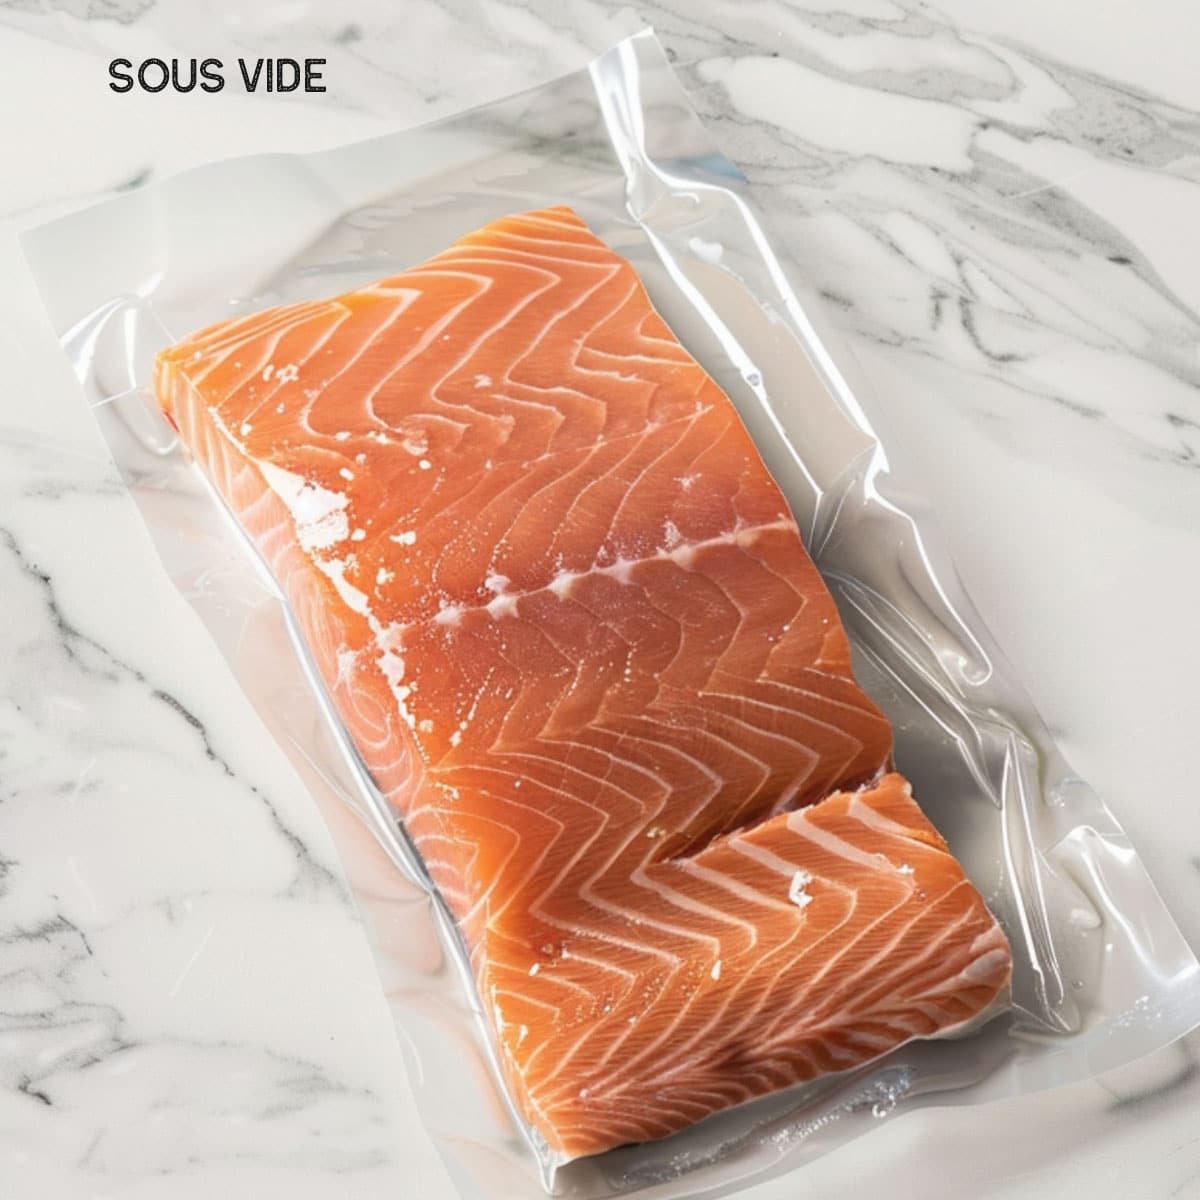 Sous vide technique for perfectly cooked salmon - vacuum-sealed fish cooks gently for tender, flaky results.